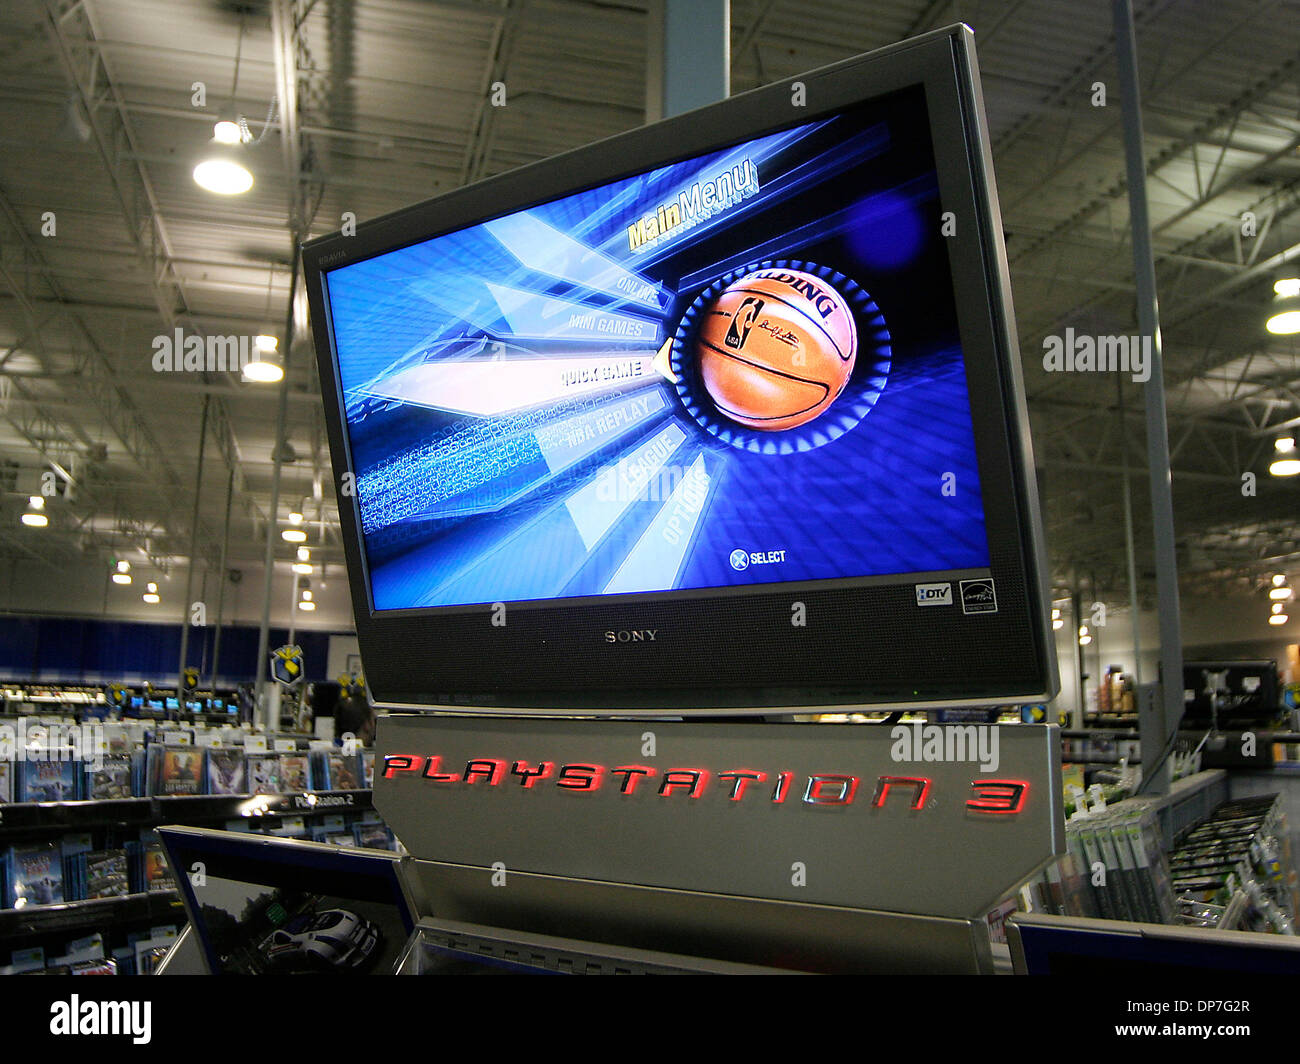 Nov 17, 2006; Essex, MD, USA; Buy's newest display featuring Sony's Playstation 3 video game system. Video game faithfuls had their first chance purchase Sony's Playstation 3 Friday Morning as